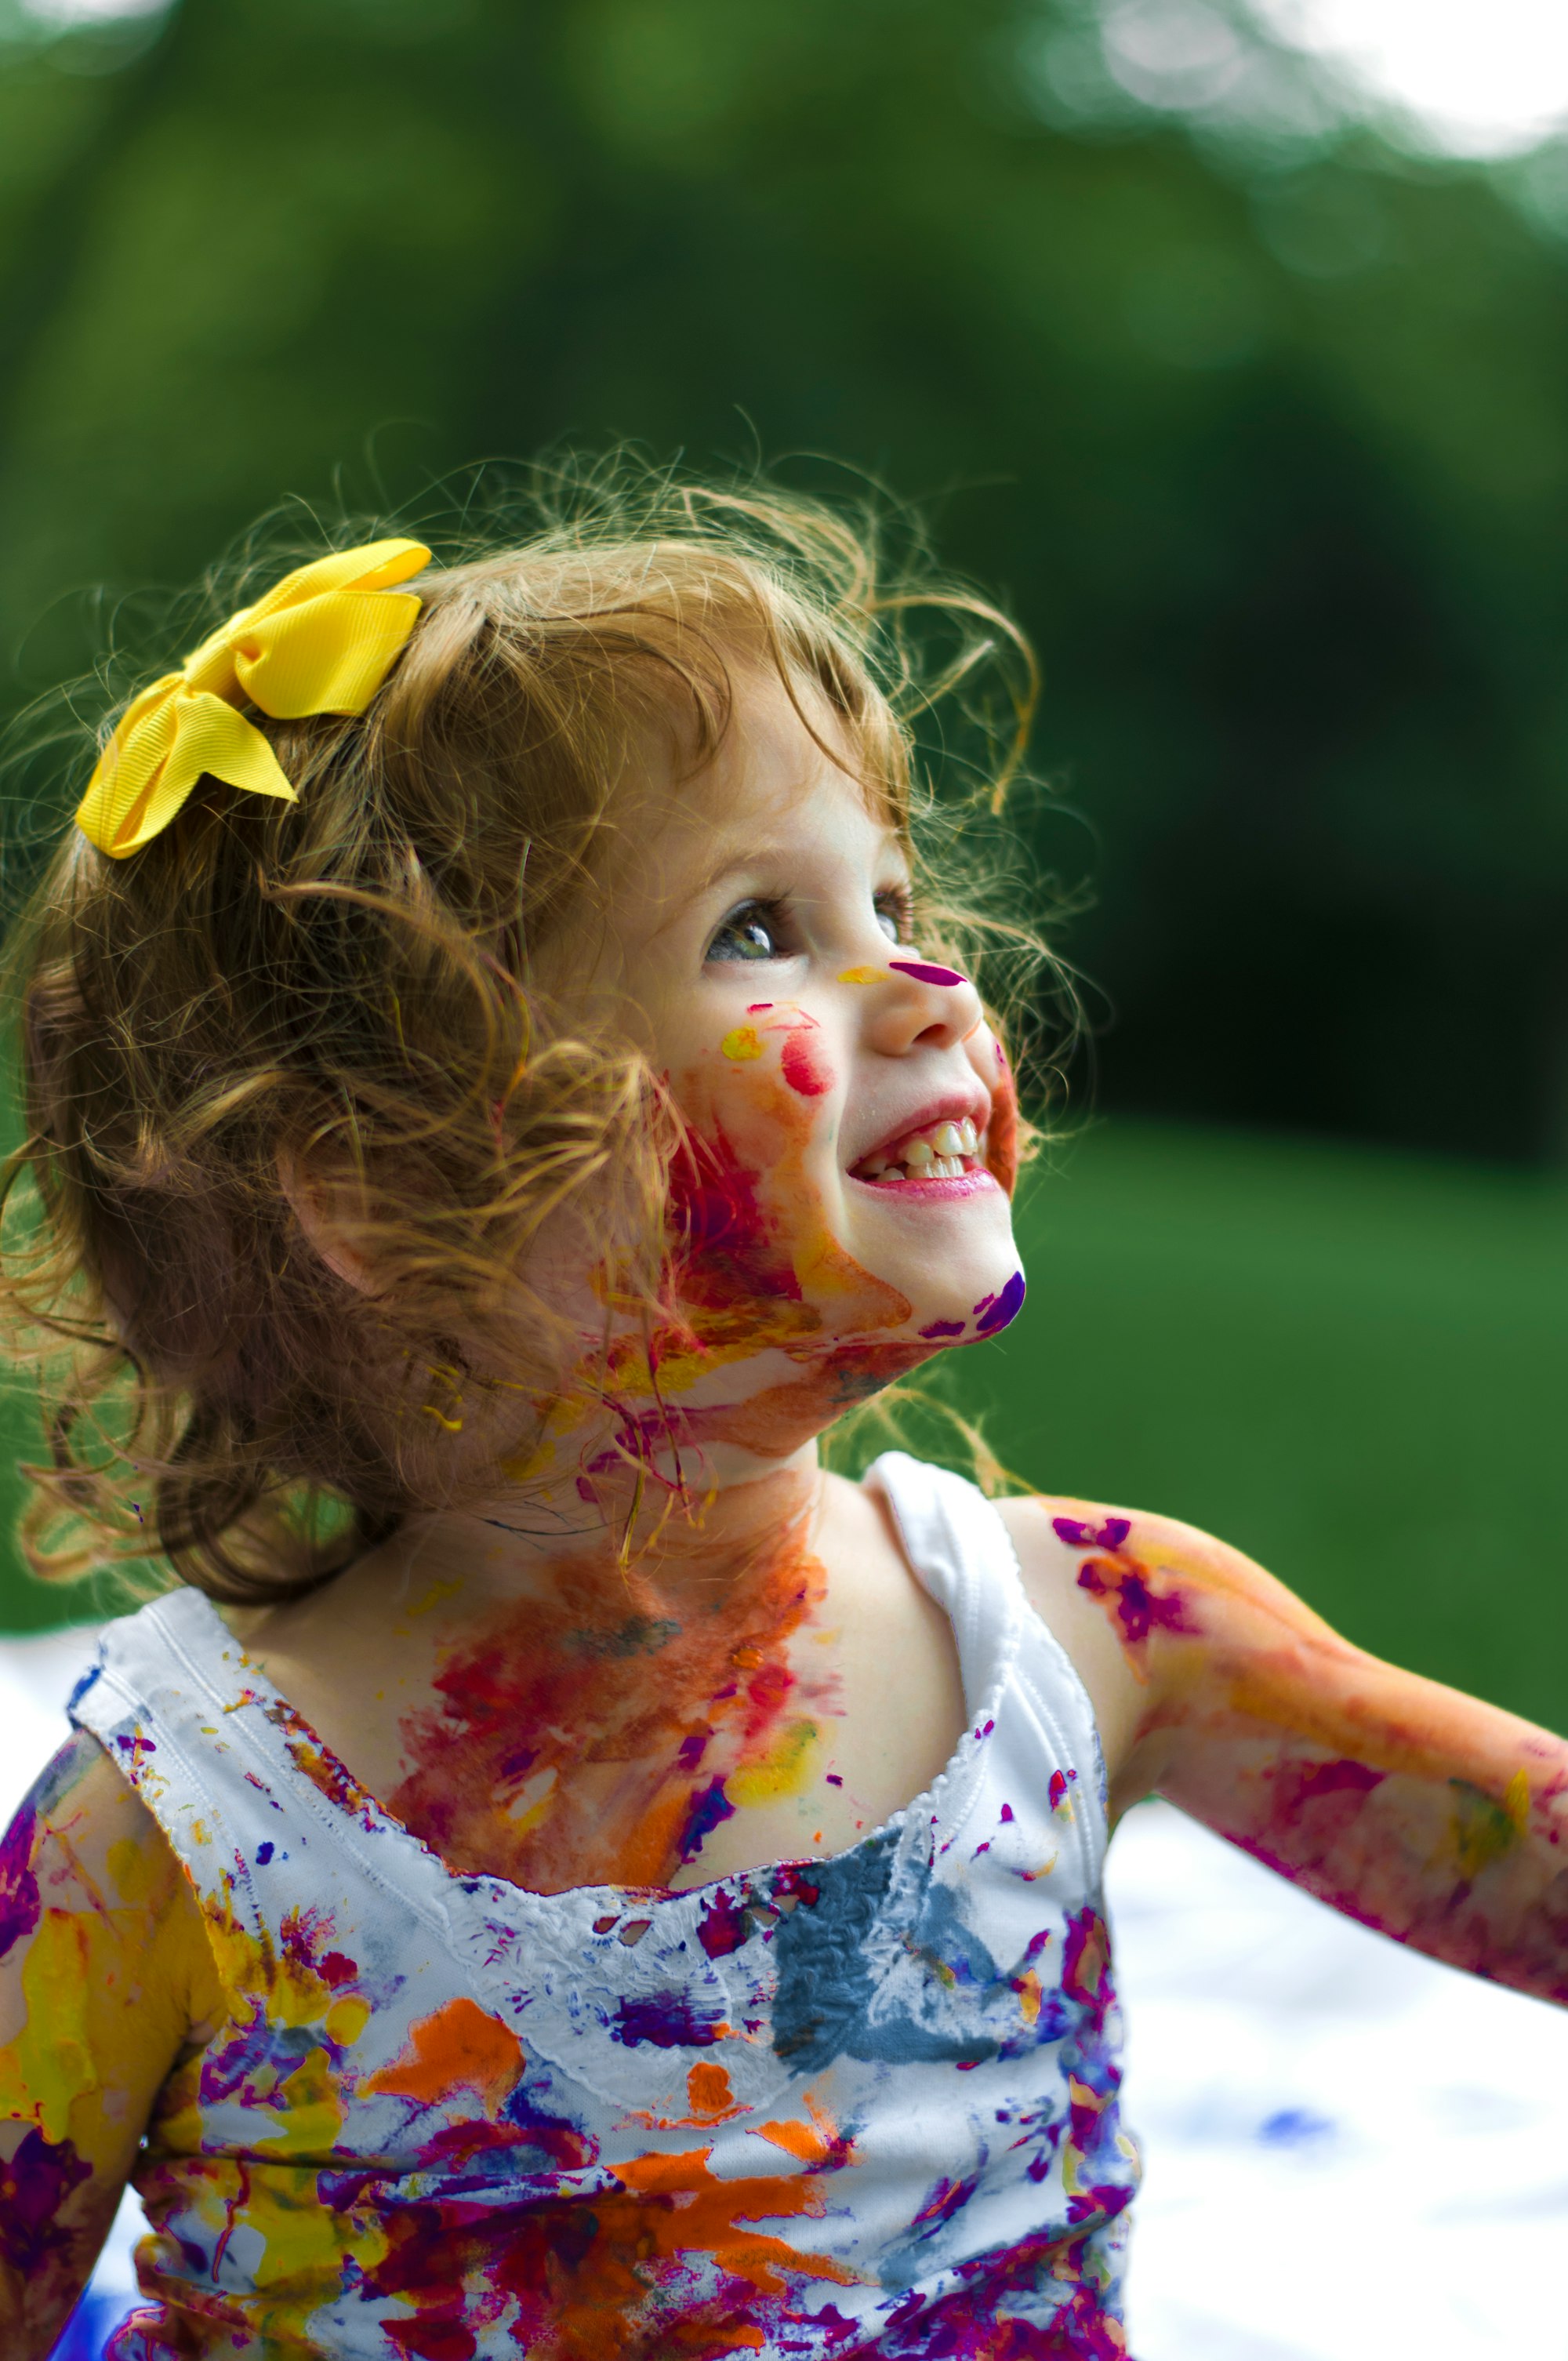 This is two-year-old Malki, her name means Queen in Yiddish. We were at the park playing with paint and bubbles and this shot was a remarkably lucky one since toddlers move so fast. This photo is important to me because it captures her innocence and reminds me how happy and carefree I was that day, hanging out with her.